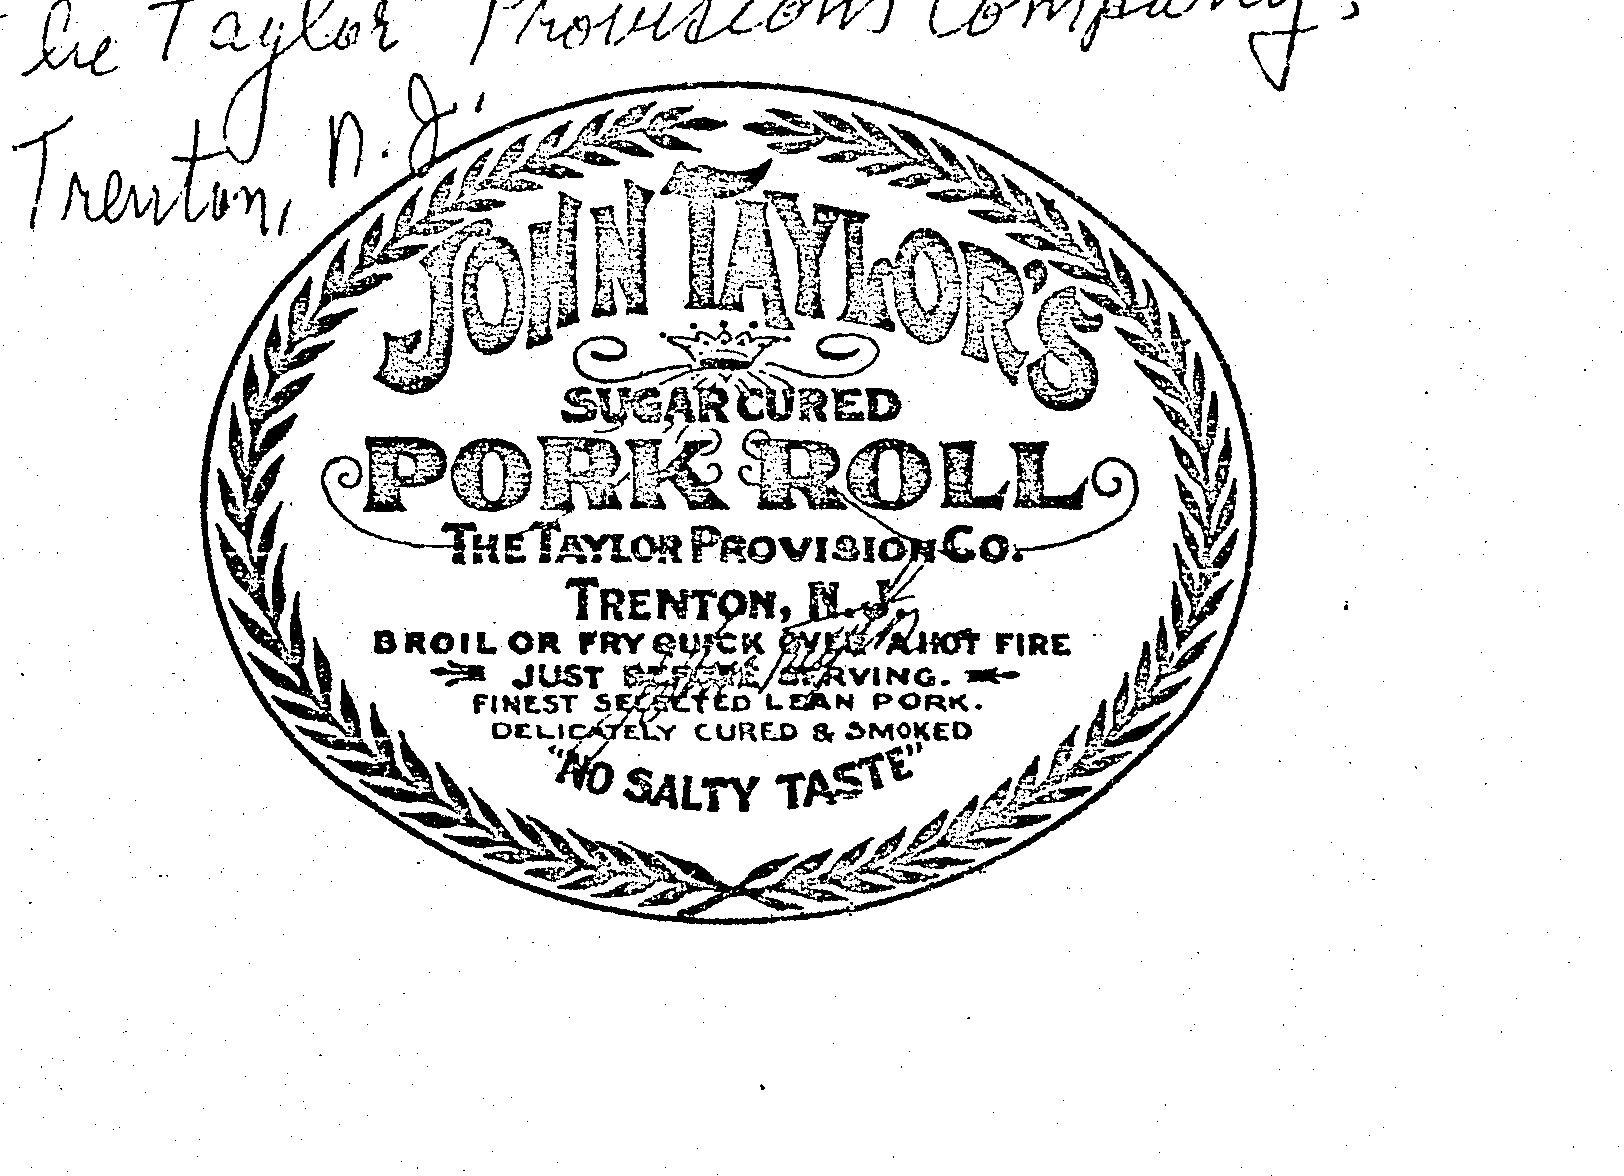  JOHN TAYLOR'S PORK ROLL SUGAR CURED THETAYLOR PROVISION CO. TRENTON N.J. BROIL OR FRY QUICK OVER A HOT FIRE JUST BEFORE SERVING 